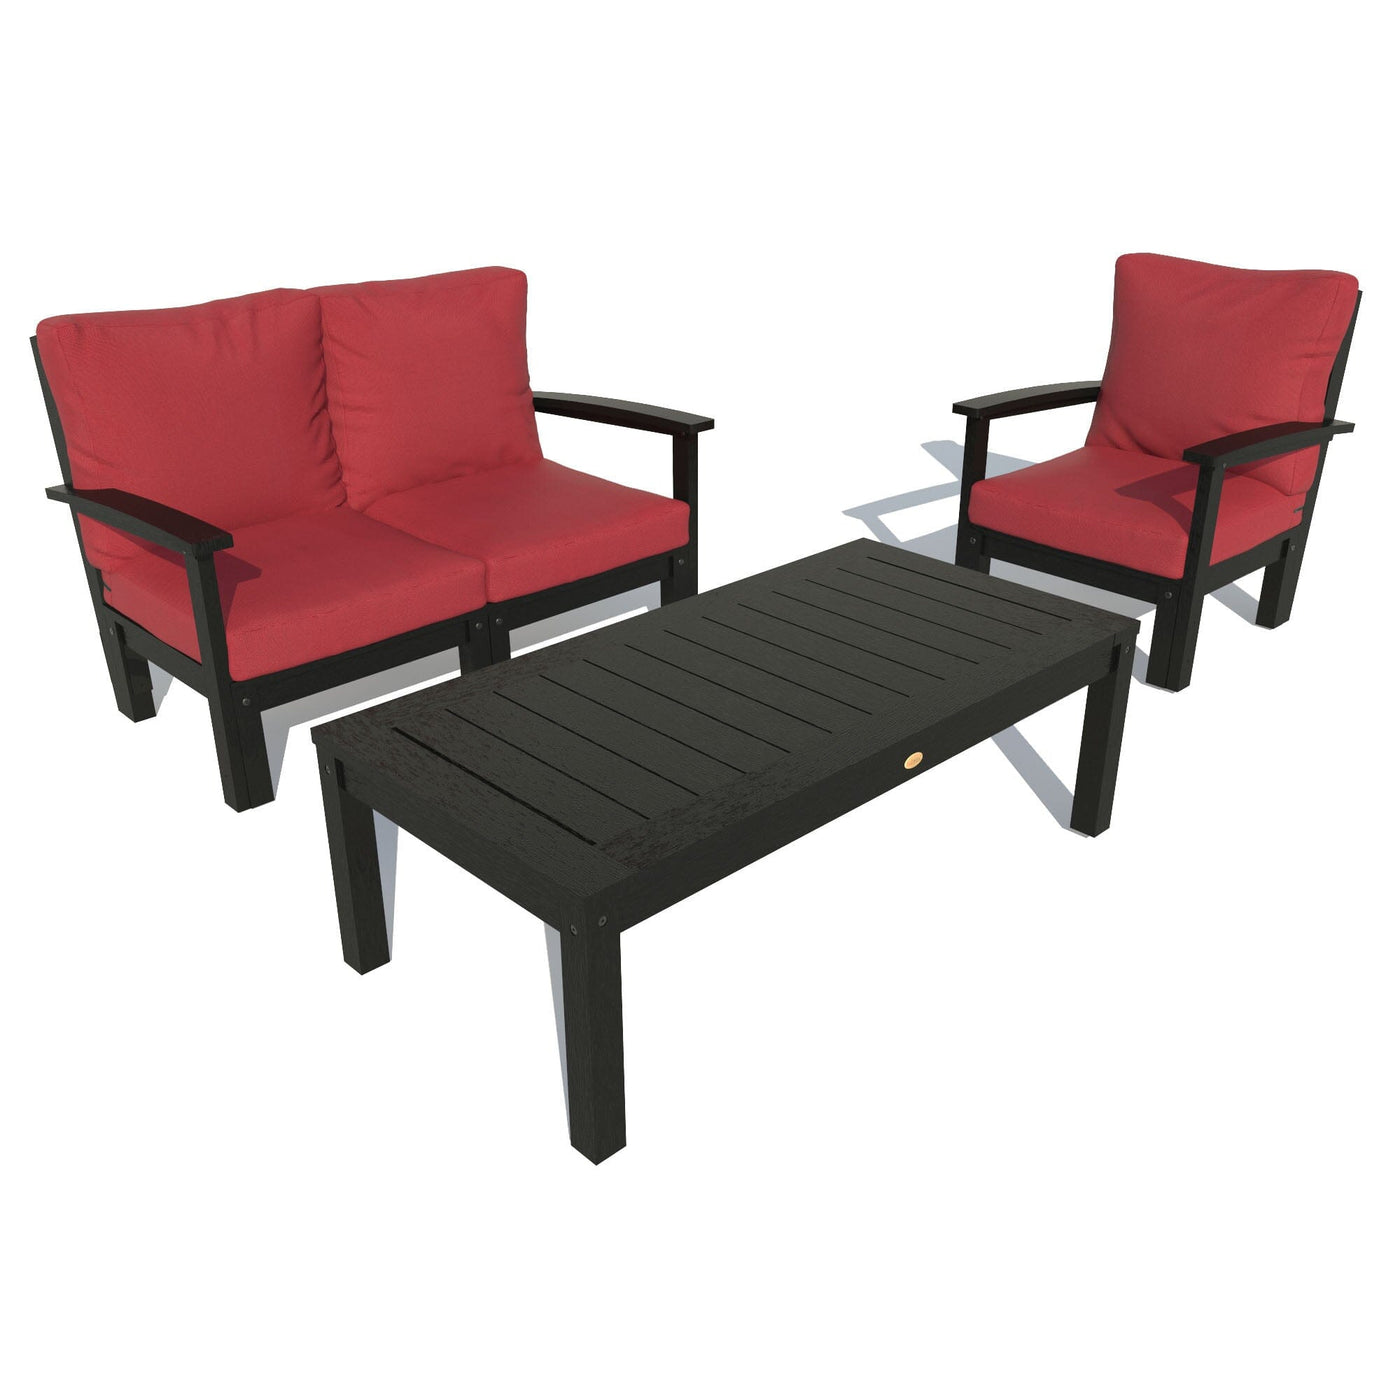 Bespoke Deep Seating: Loveseat, Chair and Conversation Table Deep Seating Highwood USA Firecracker Red Black 